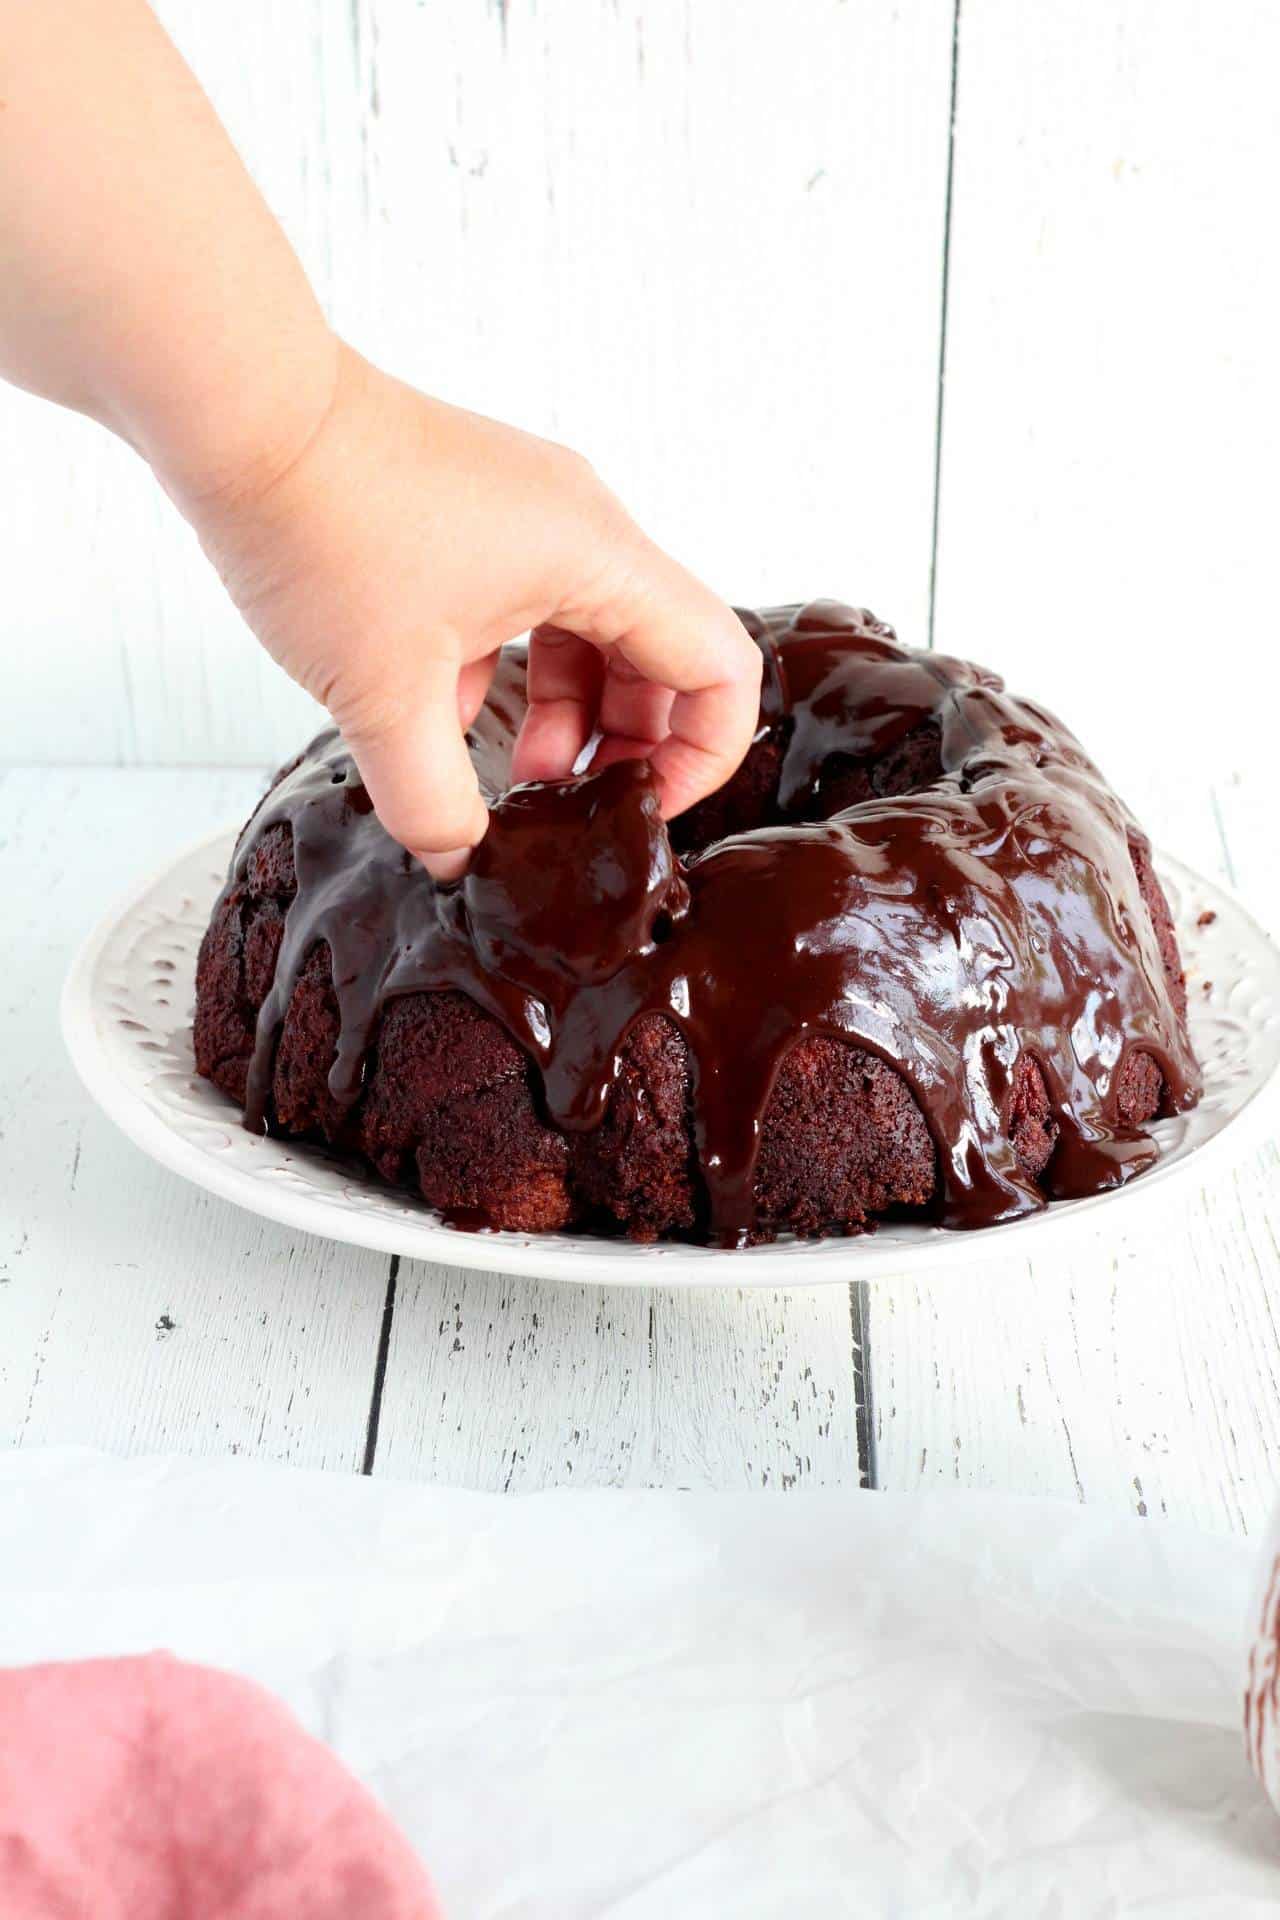 Hand grabbing first piece of pull apart chocolate bread from white plate